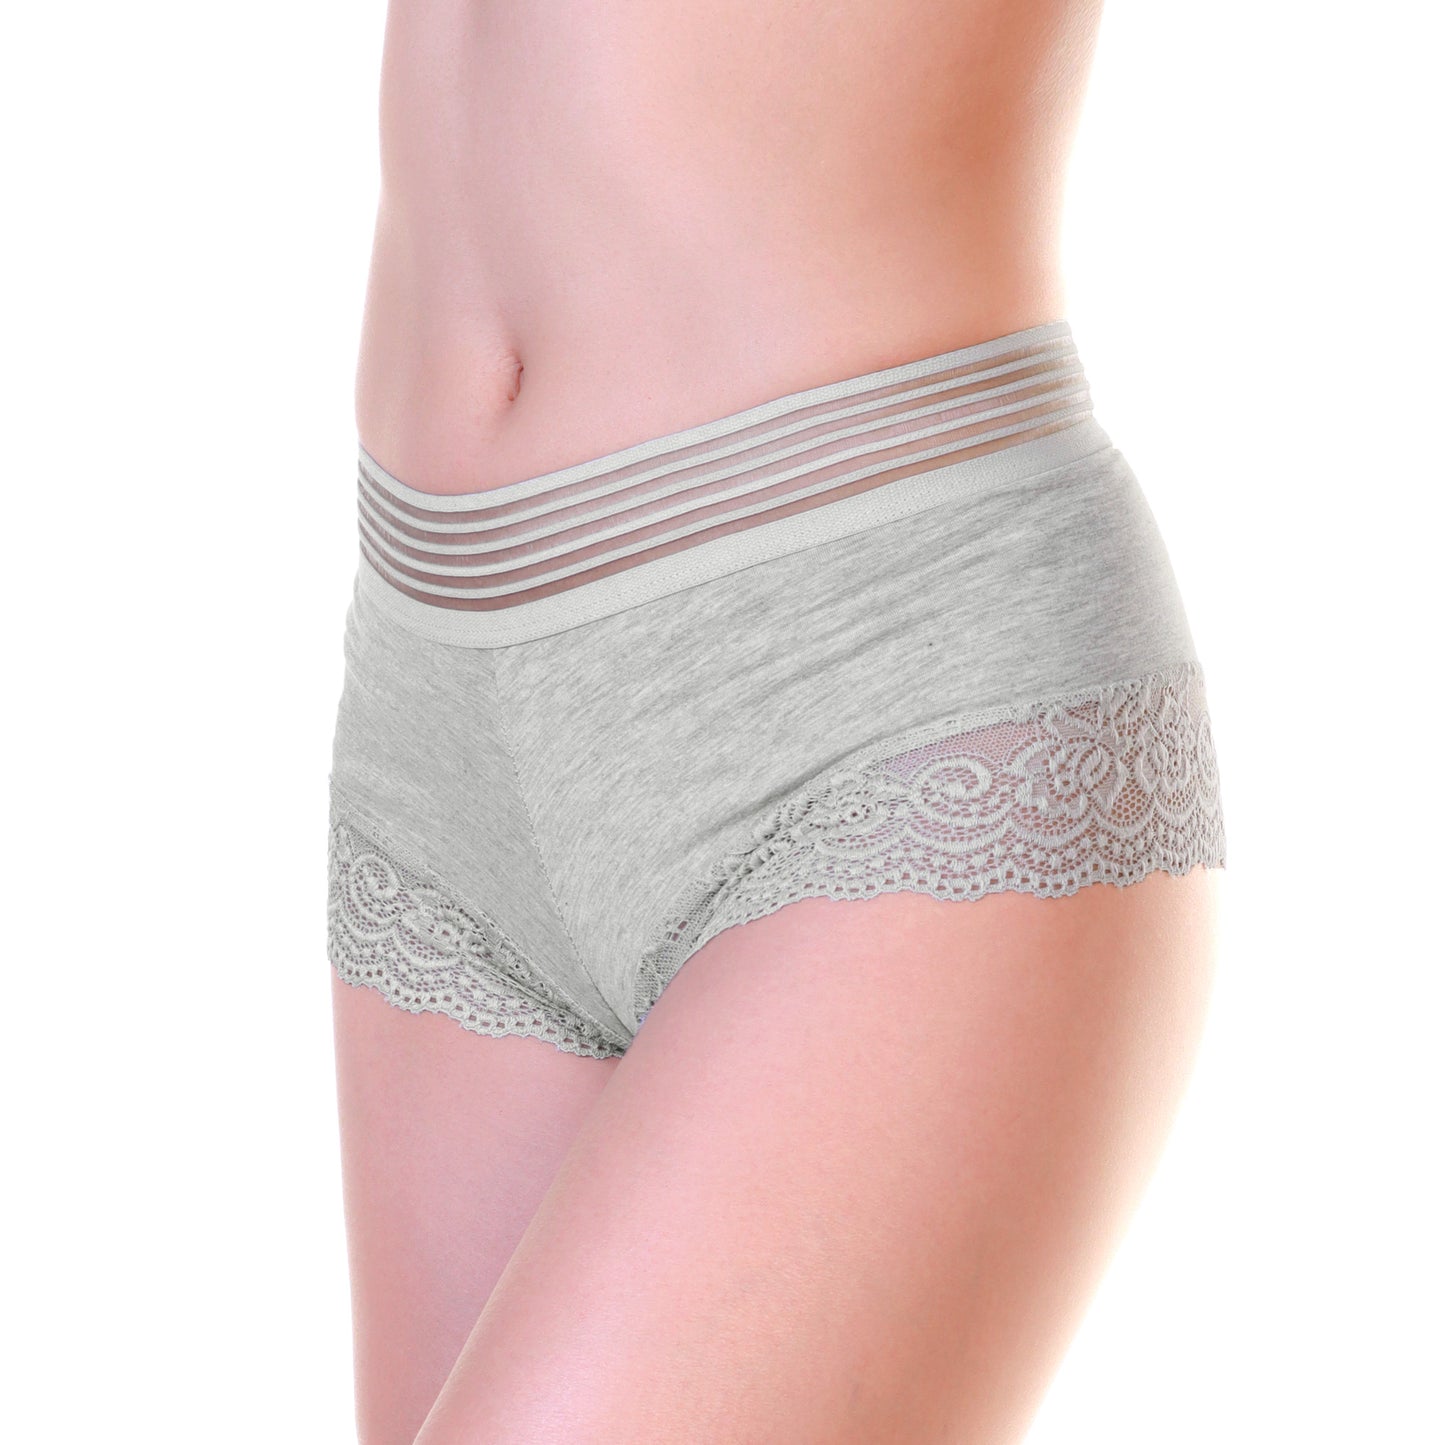 Angelina Cotton Boyshort Panties with Leg Lace Accent (12-Pack), #G6812